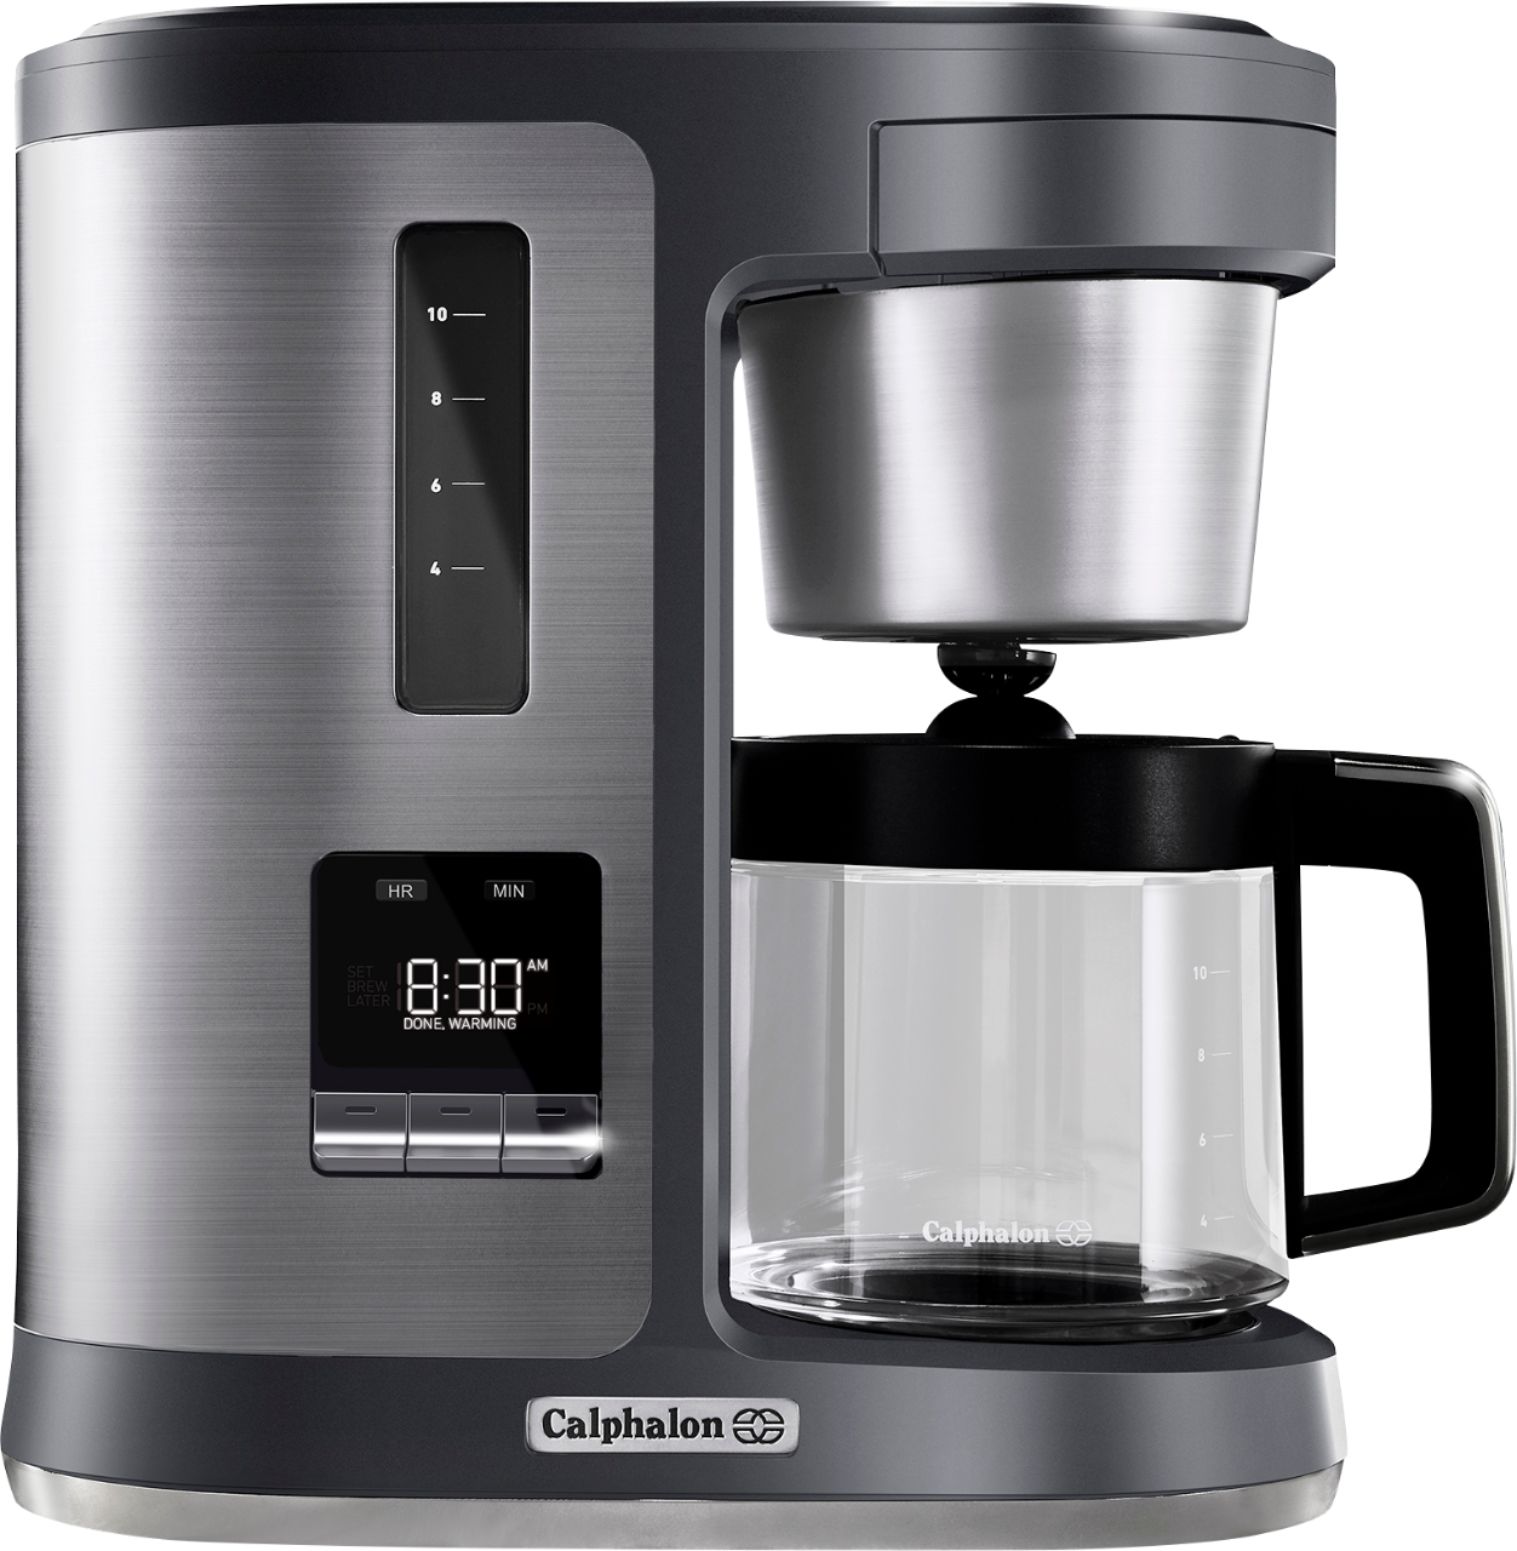 Calphalon Special Brew 10 Cup Coffee Maker Dark Stainless Steel